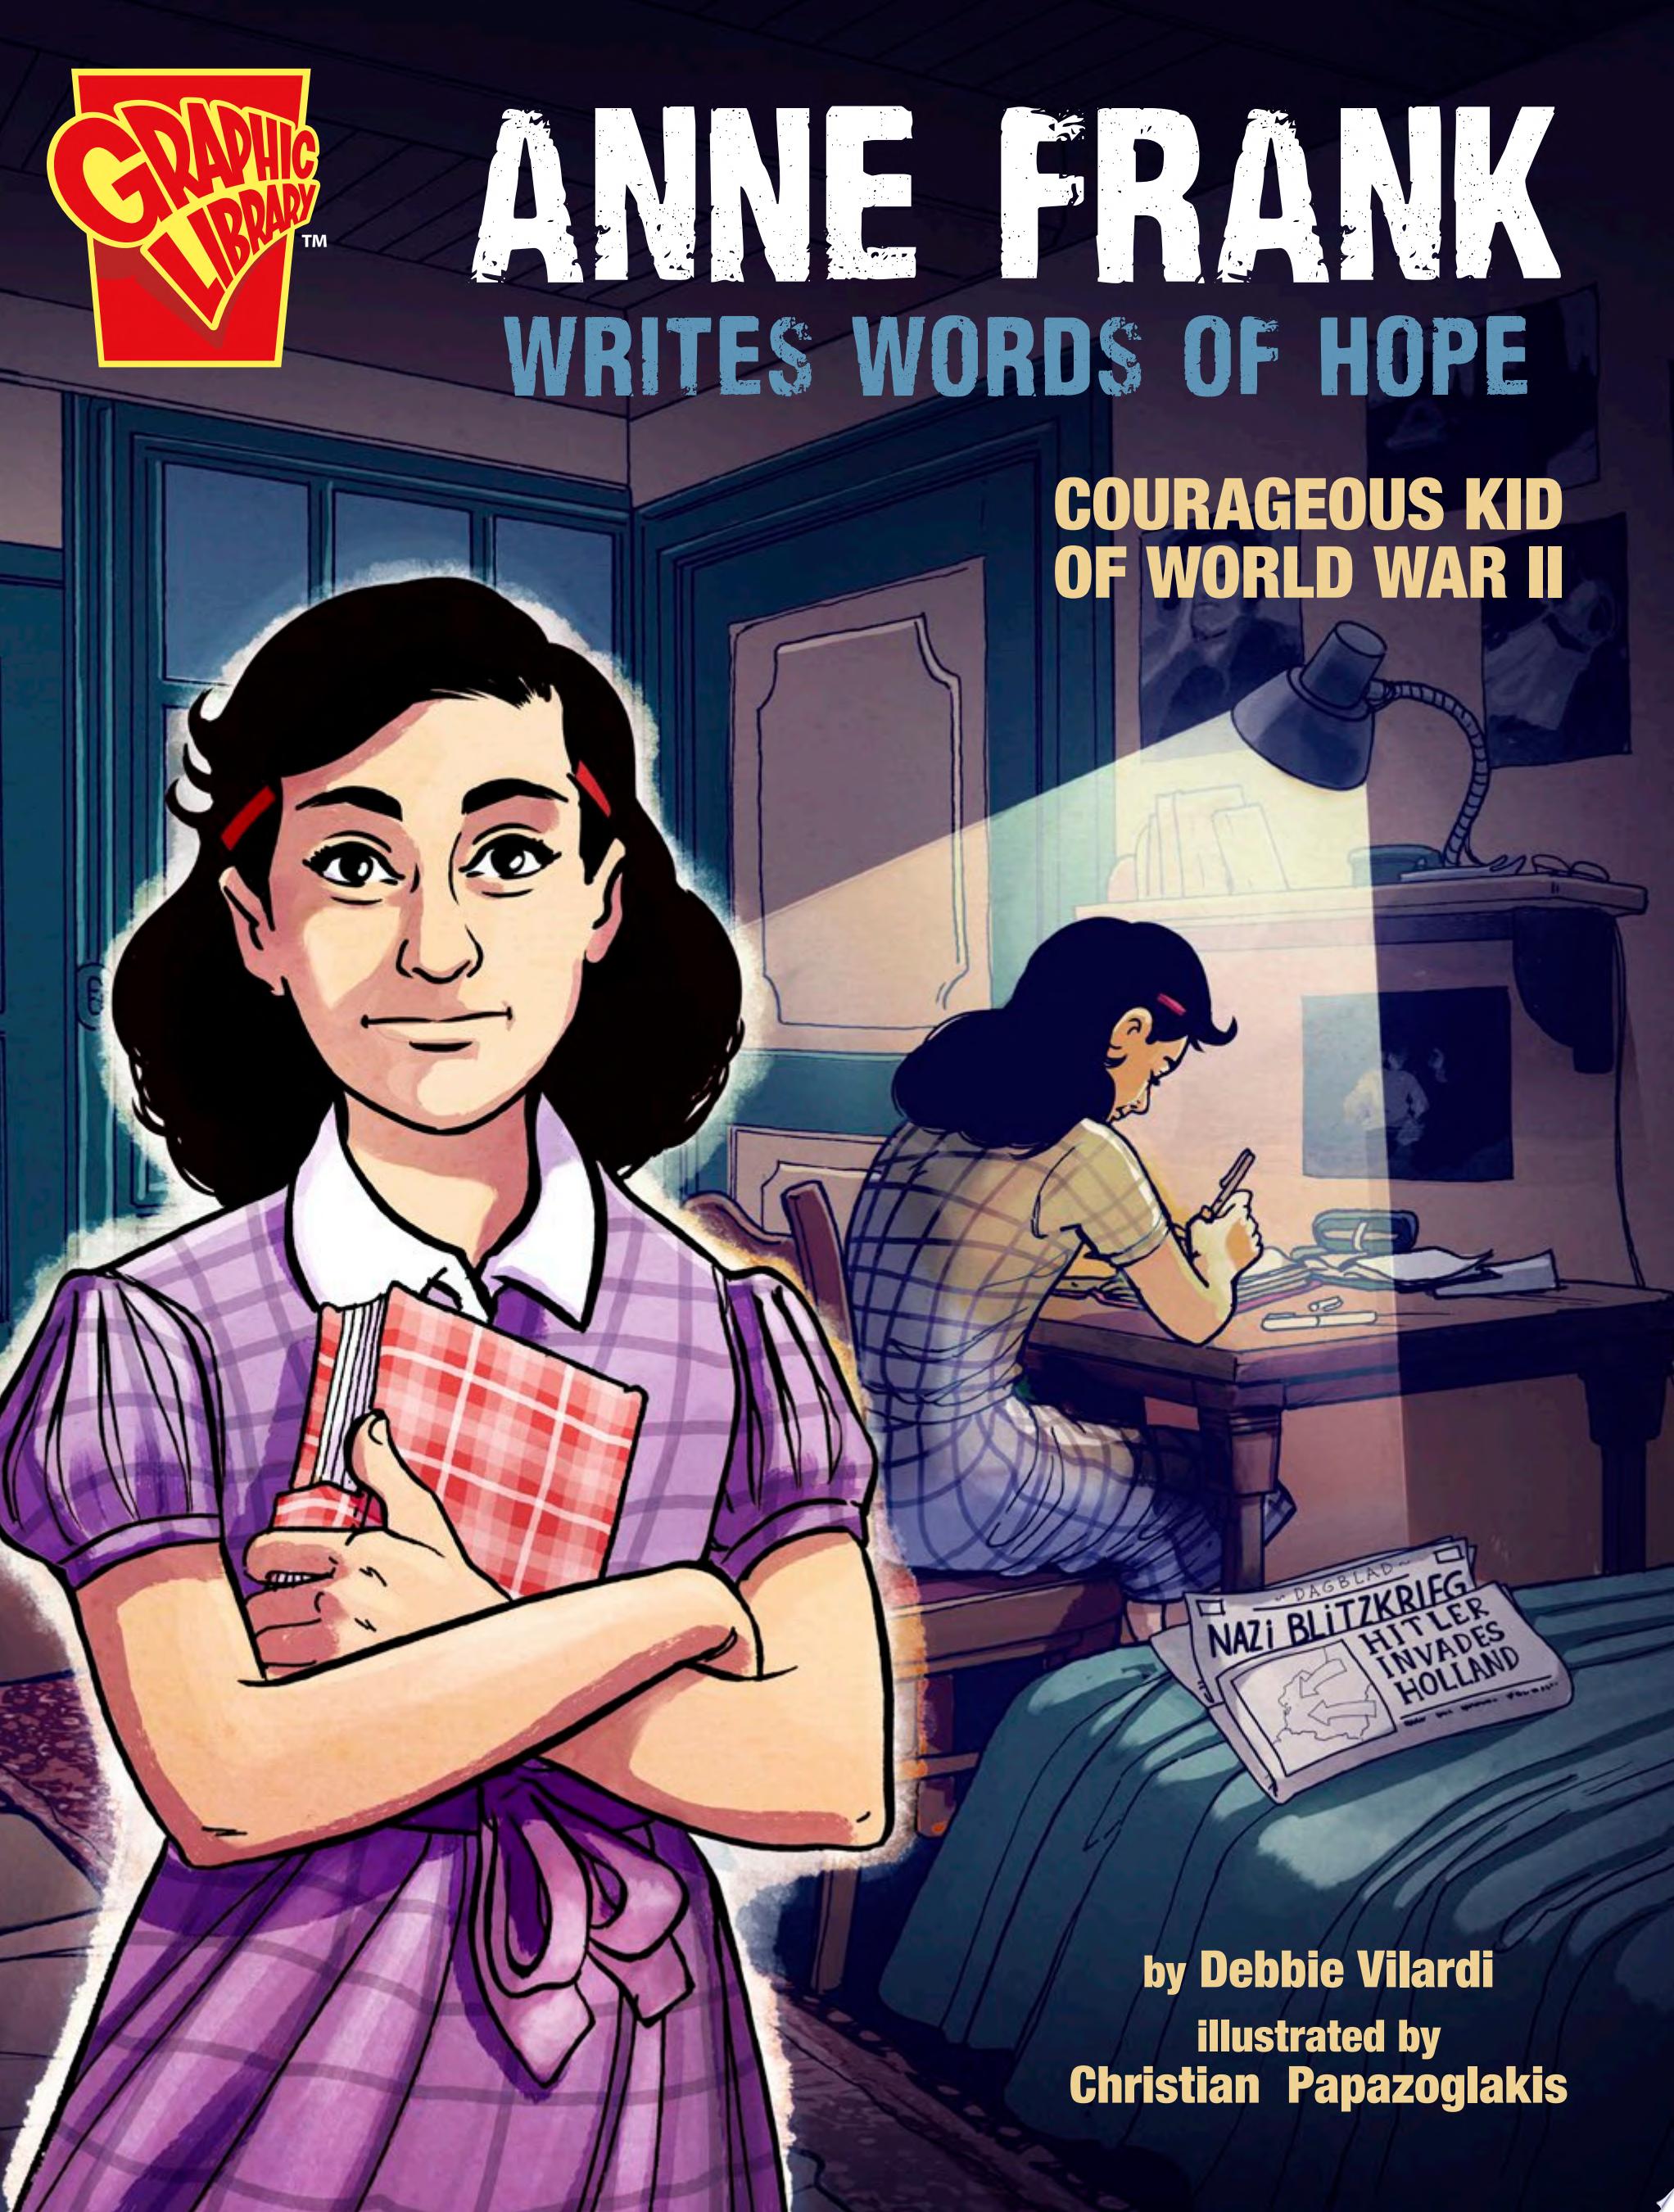 Image for "Anne Frank Writes Words of Hope"